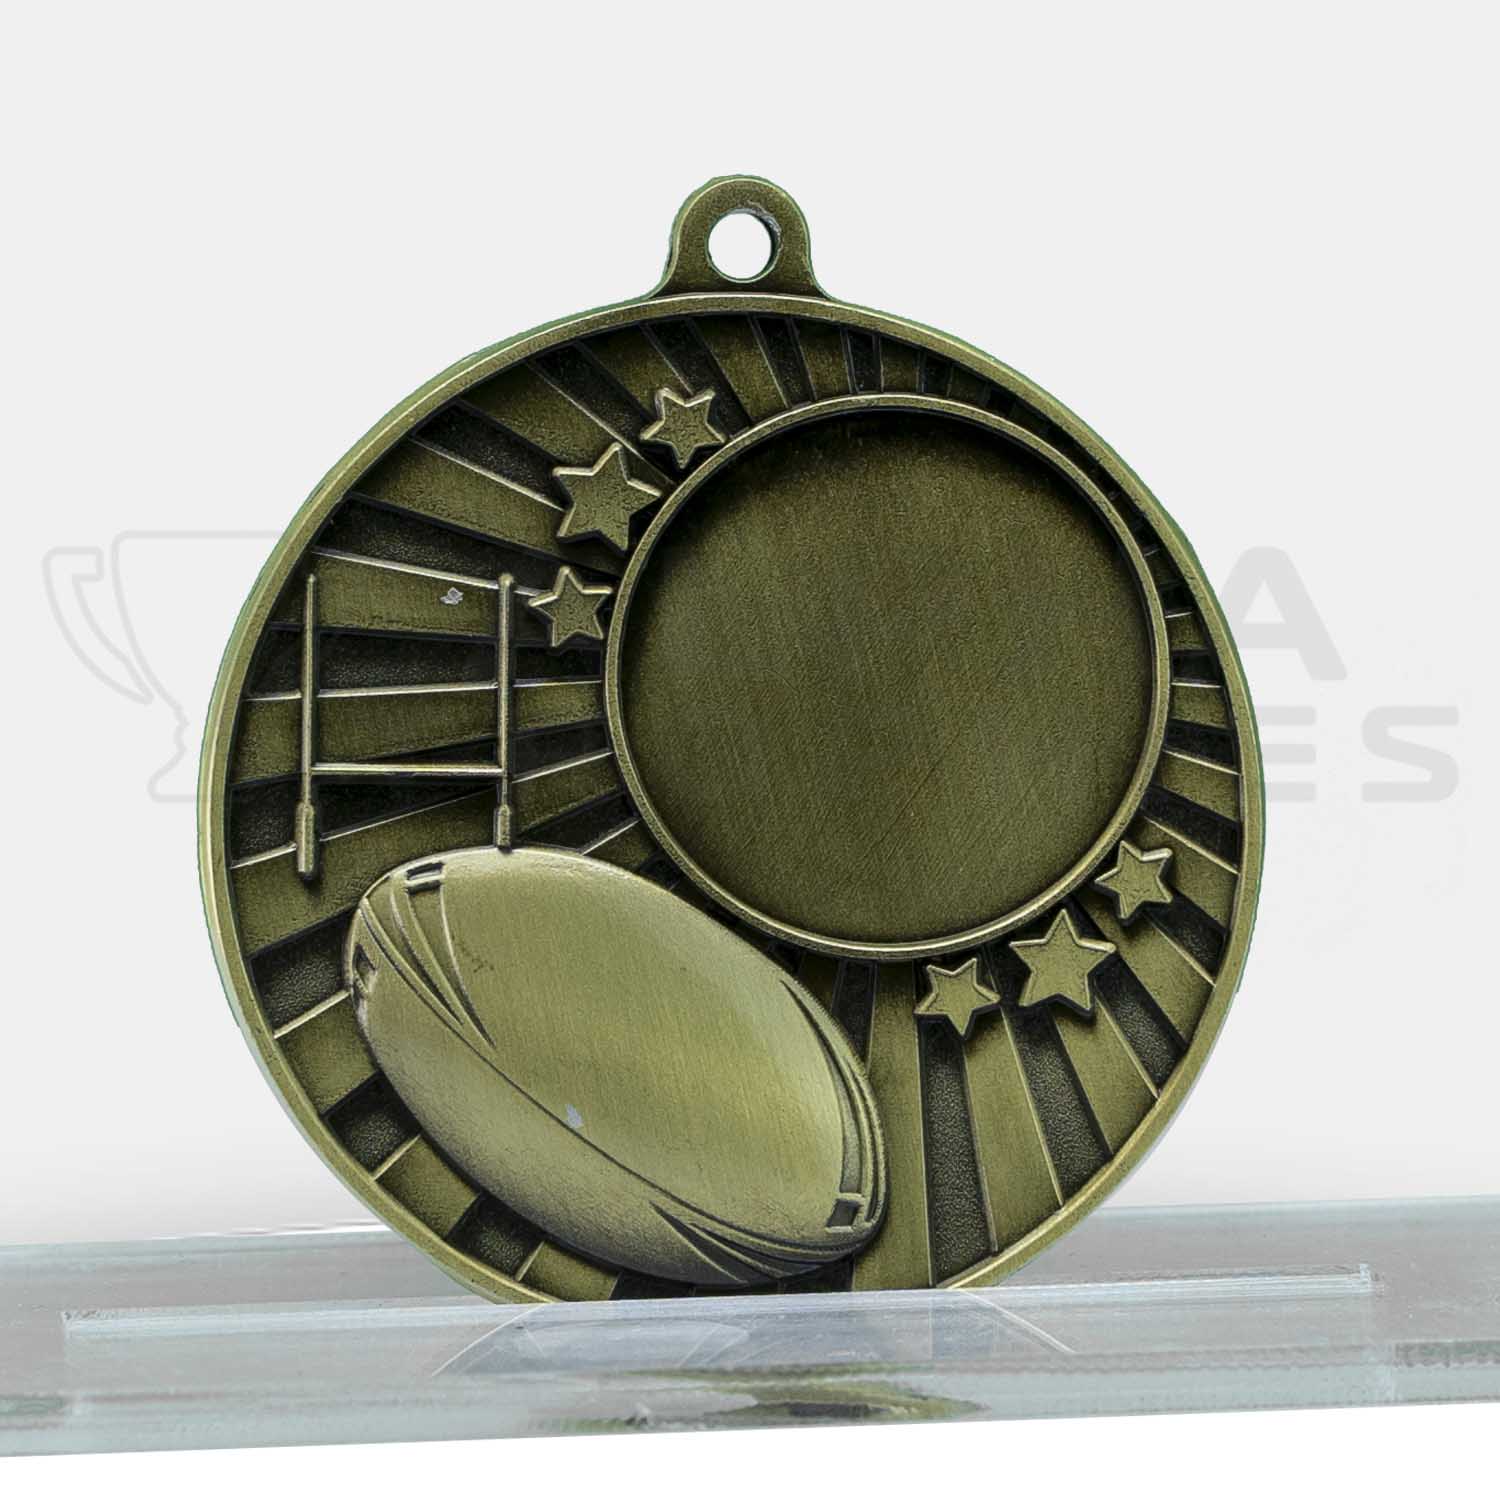 impact-medal-rugby-league-union-gold-mz613g-front